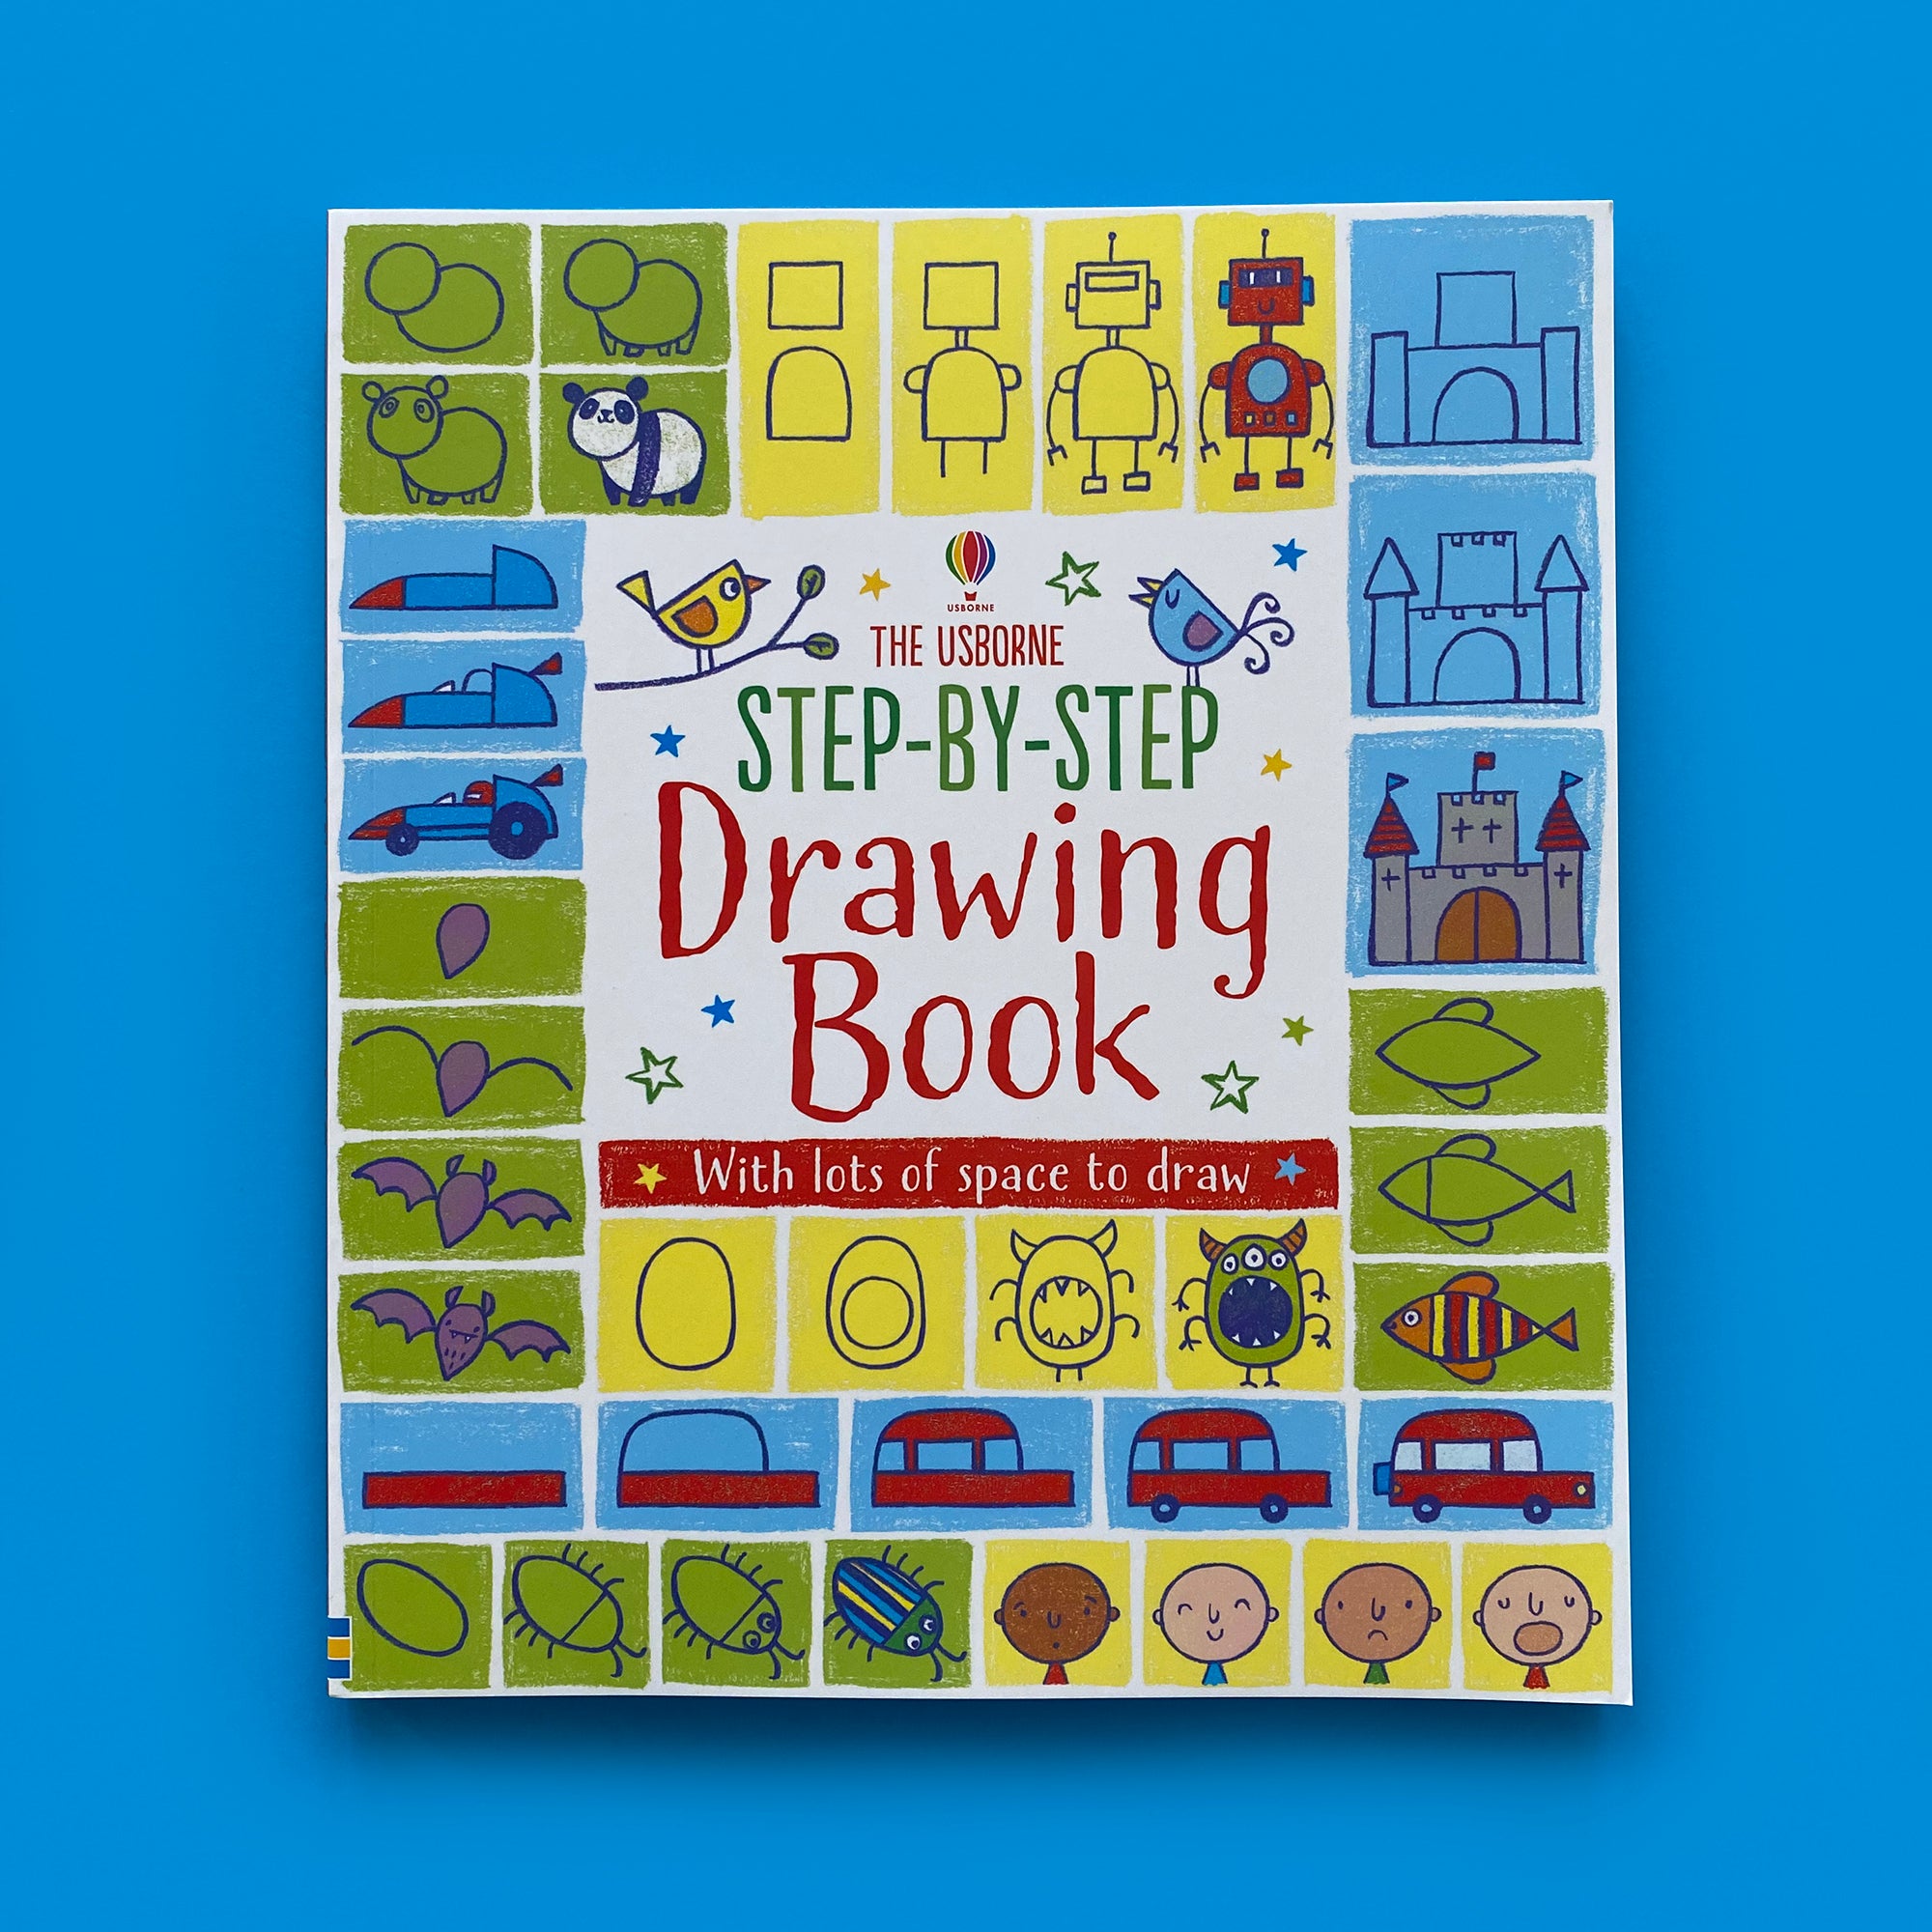 The Usborne Big Drawing Book for Little Kids Who Love To Draw 